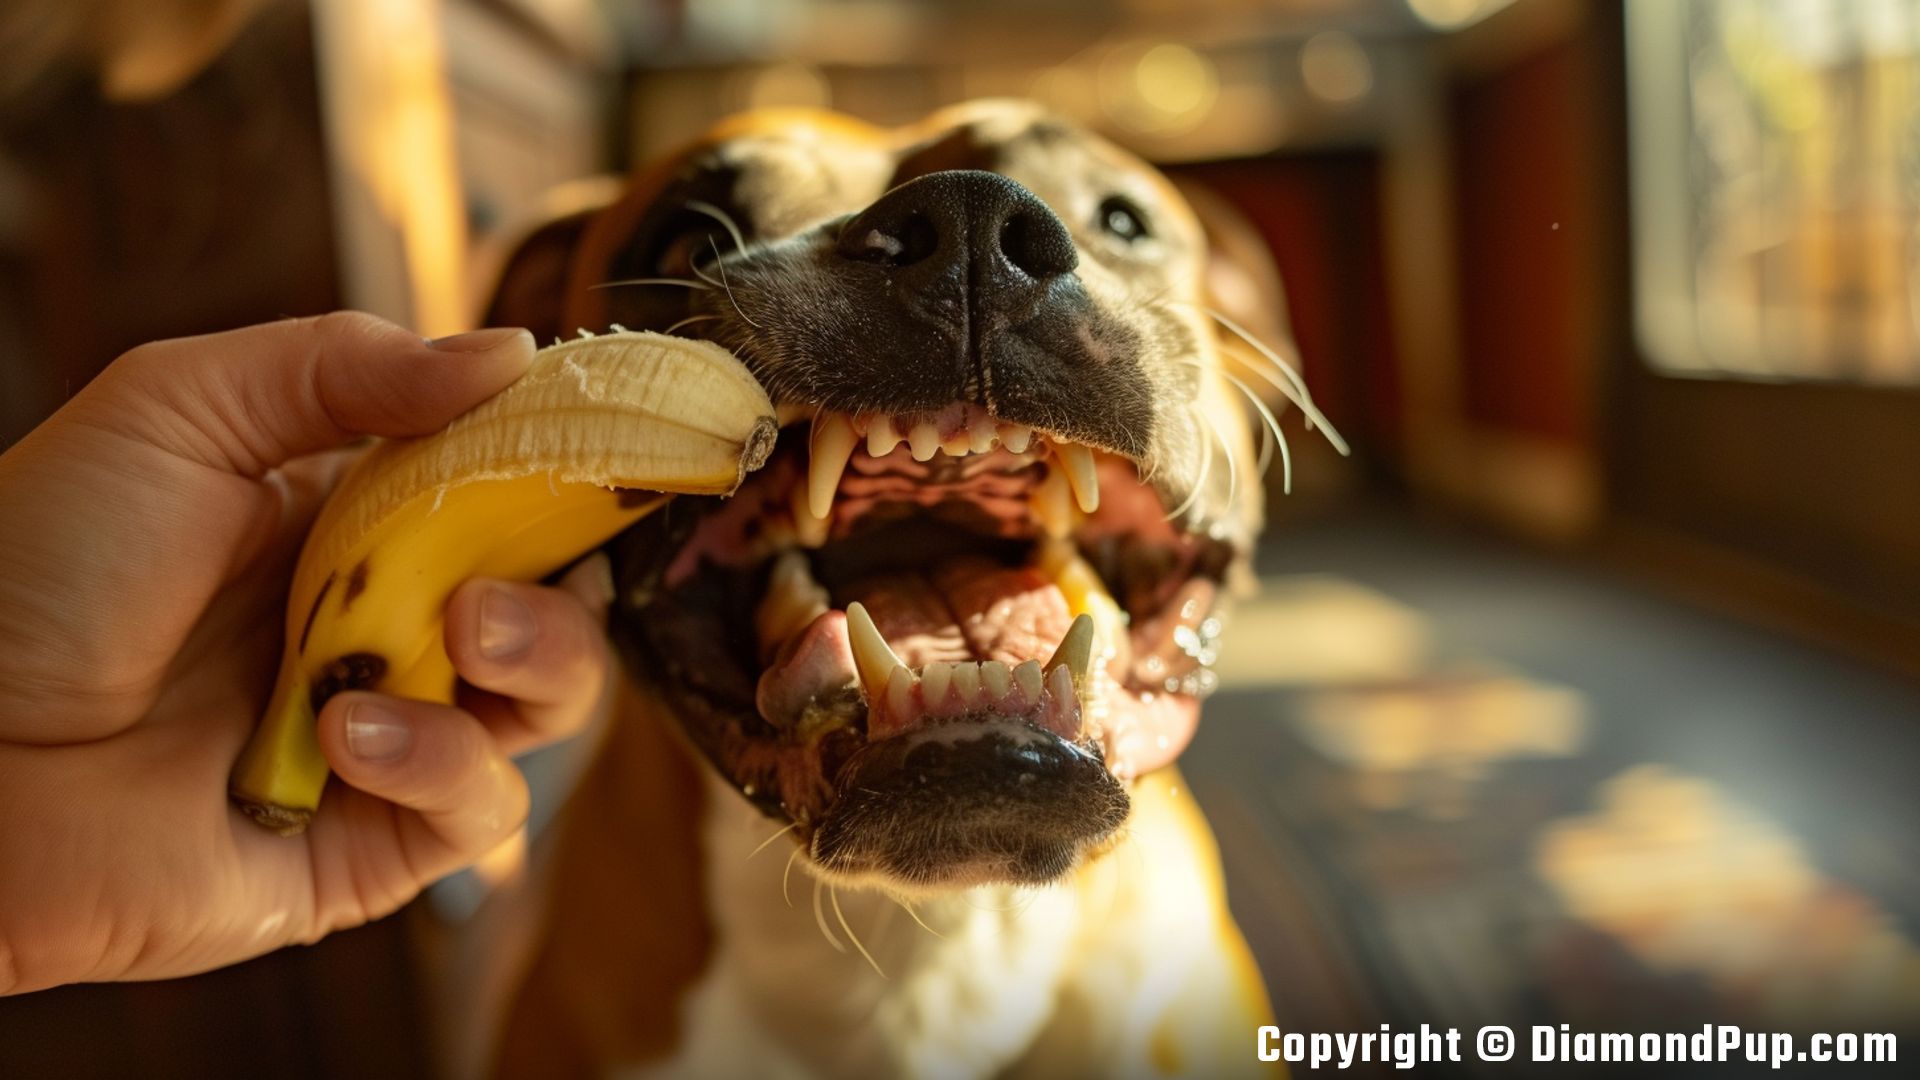 Photograph of a Happy Boxer Snacking on Banana